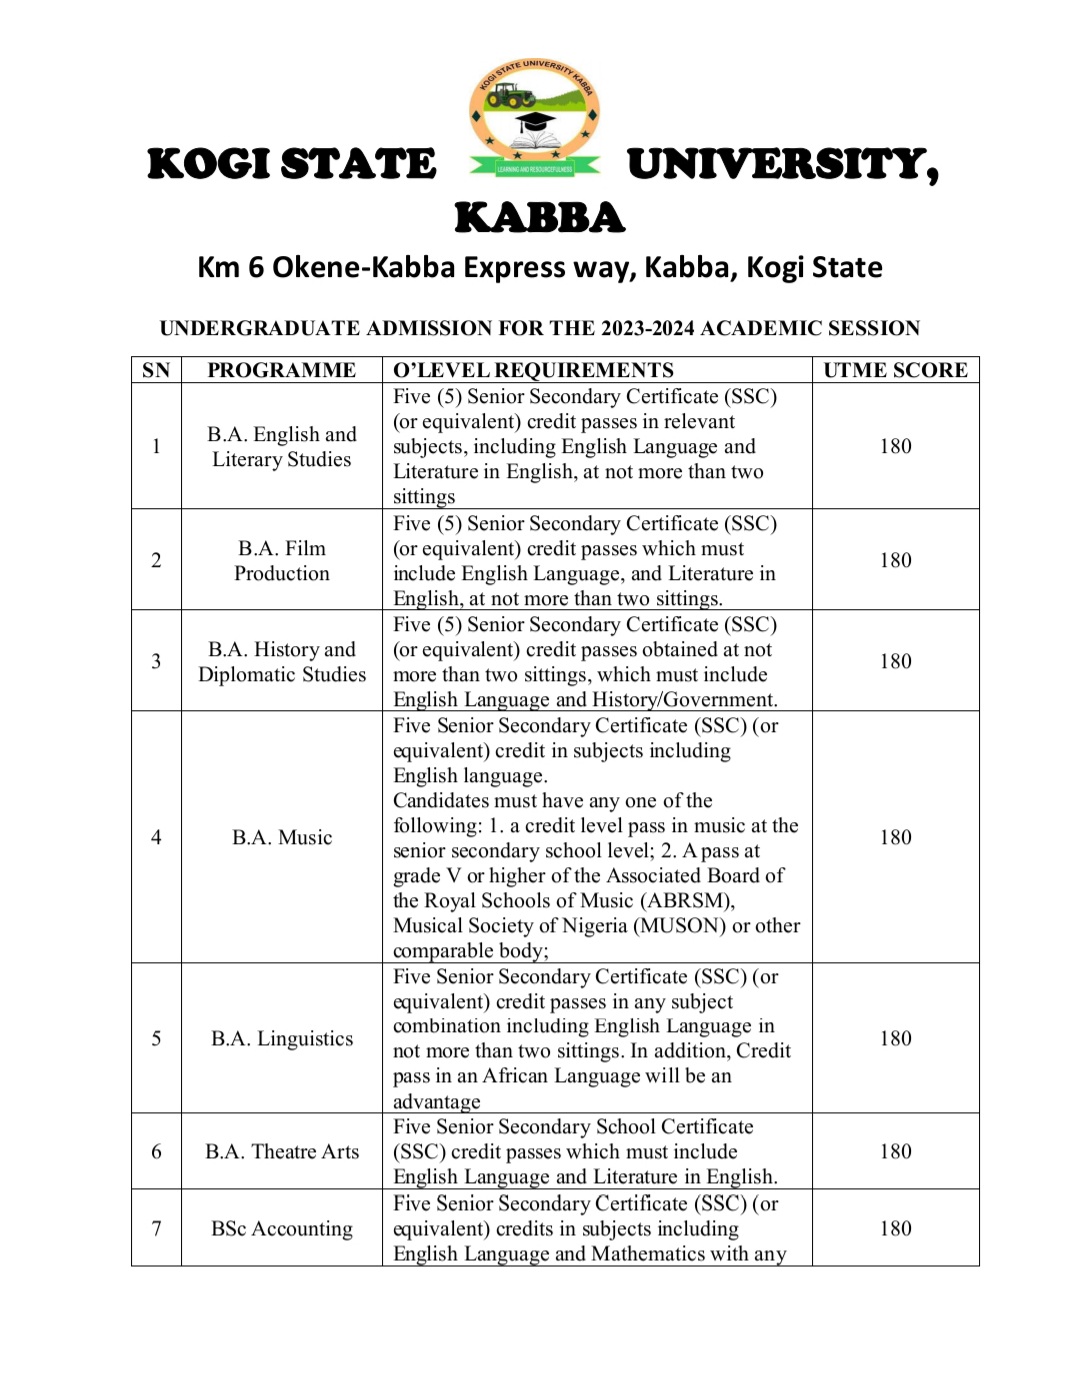 KOGI STATE UNIVERSITY, KABBA (KSUK) RELEASE CUT OFF POINT FOR UNDERGRADUATE ADMISSION FOR THE 2023-2024 ACADEMIC SESSION